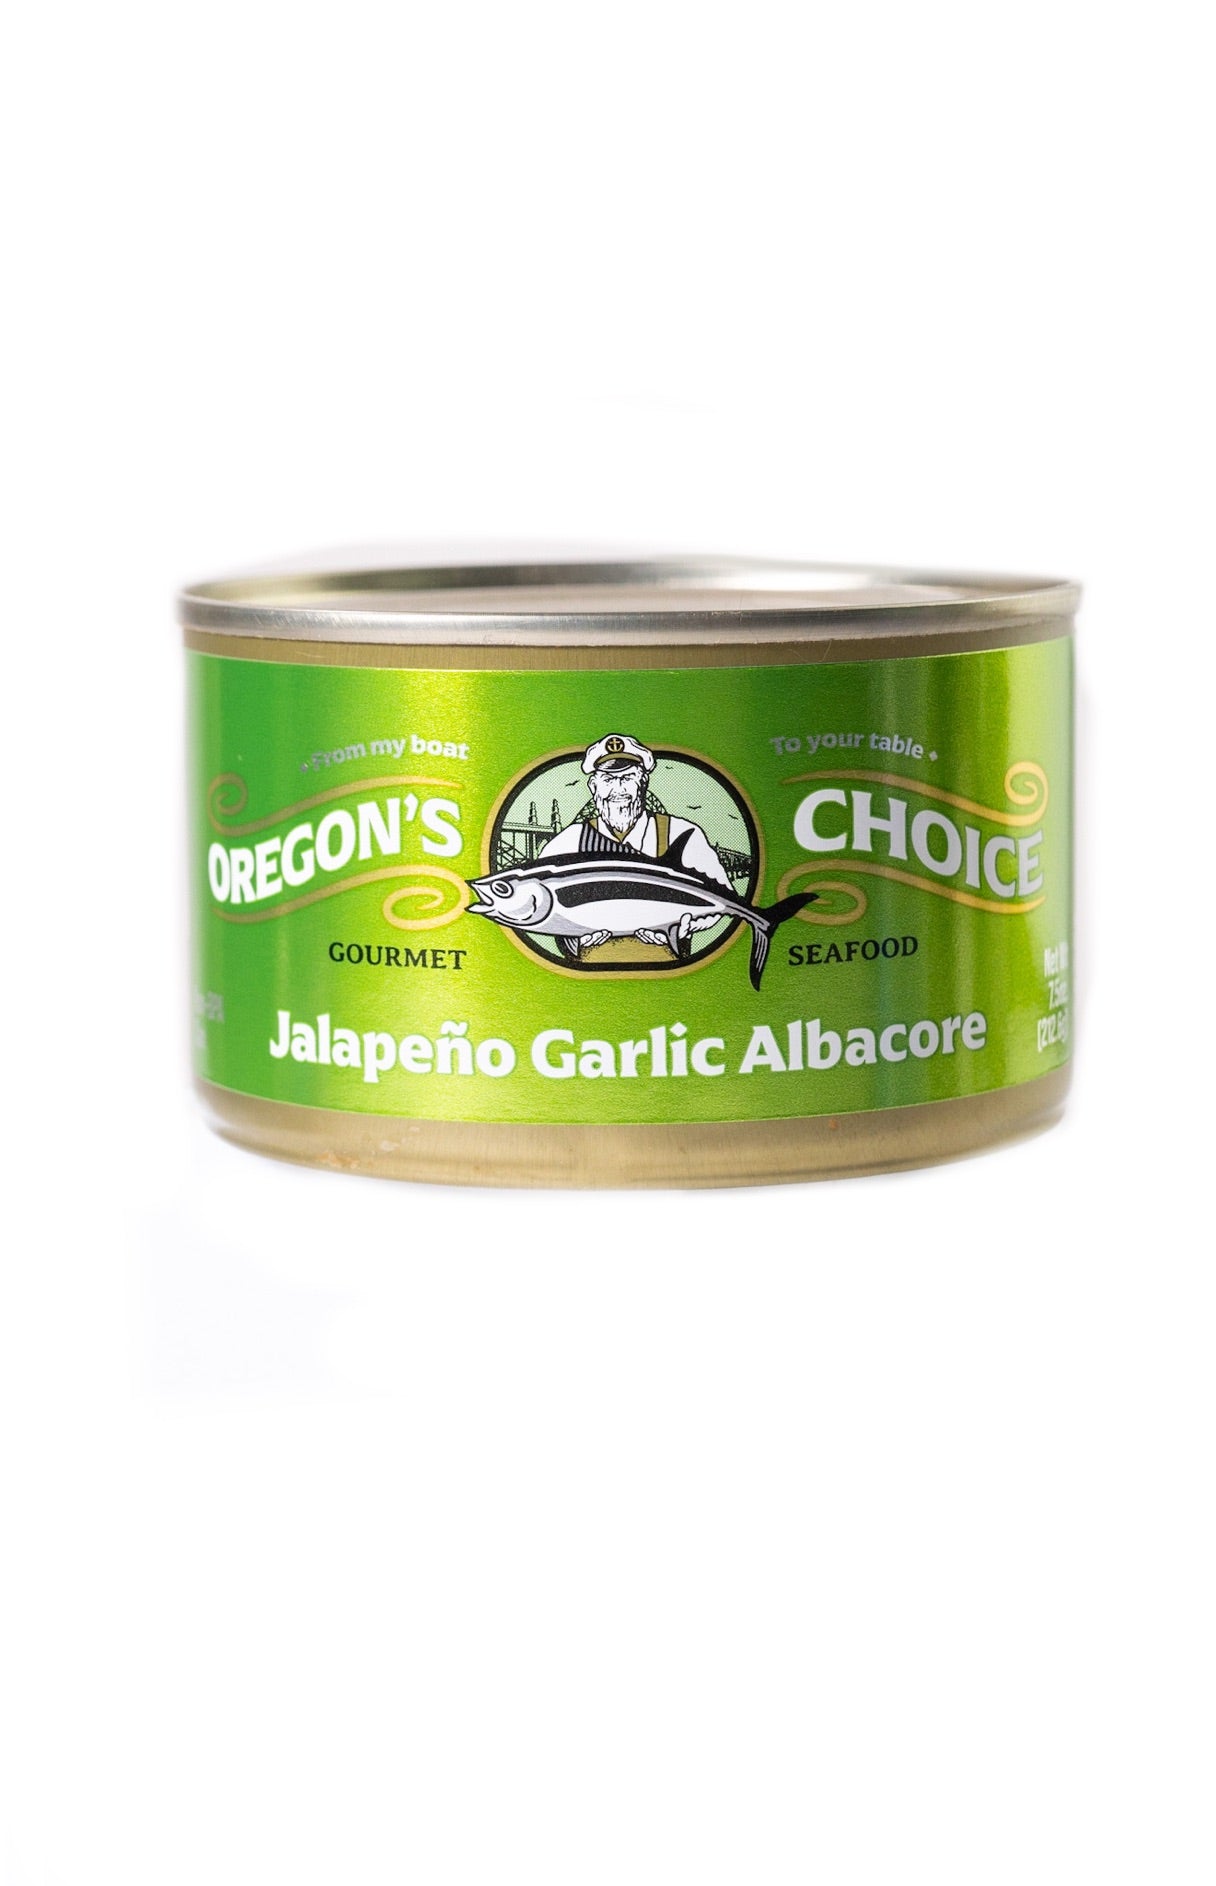 Gourmet Albacore Tuna (Lightly Salted) 7.5oz Can by Oregon's Choice –  MadeHere